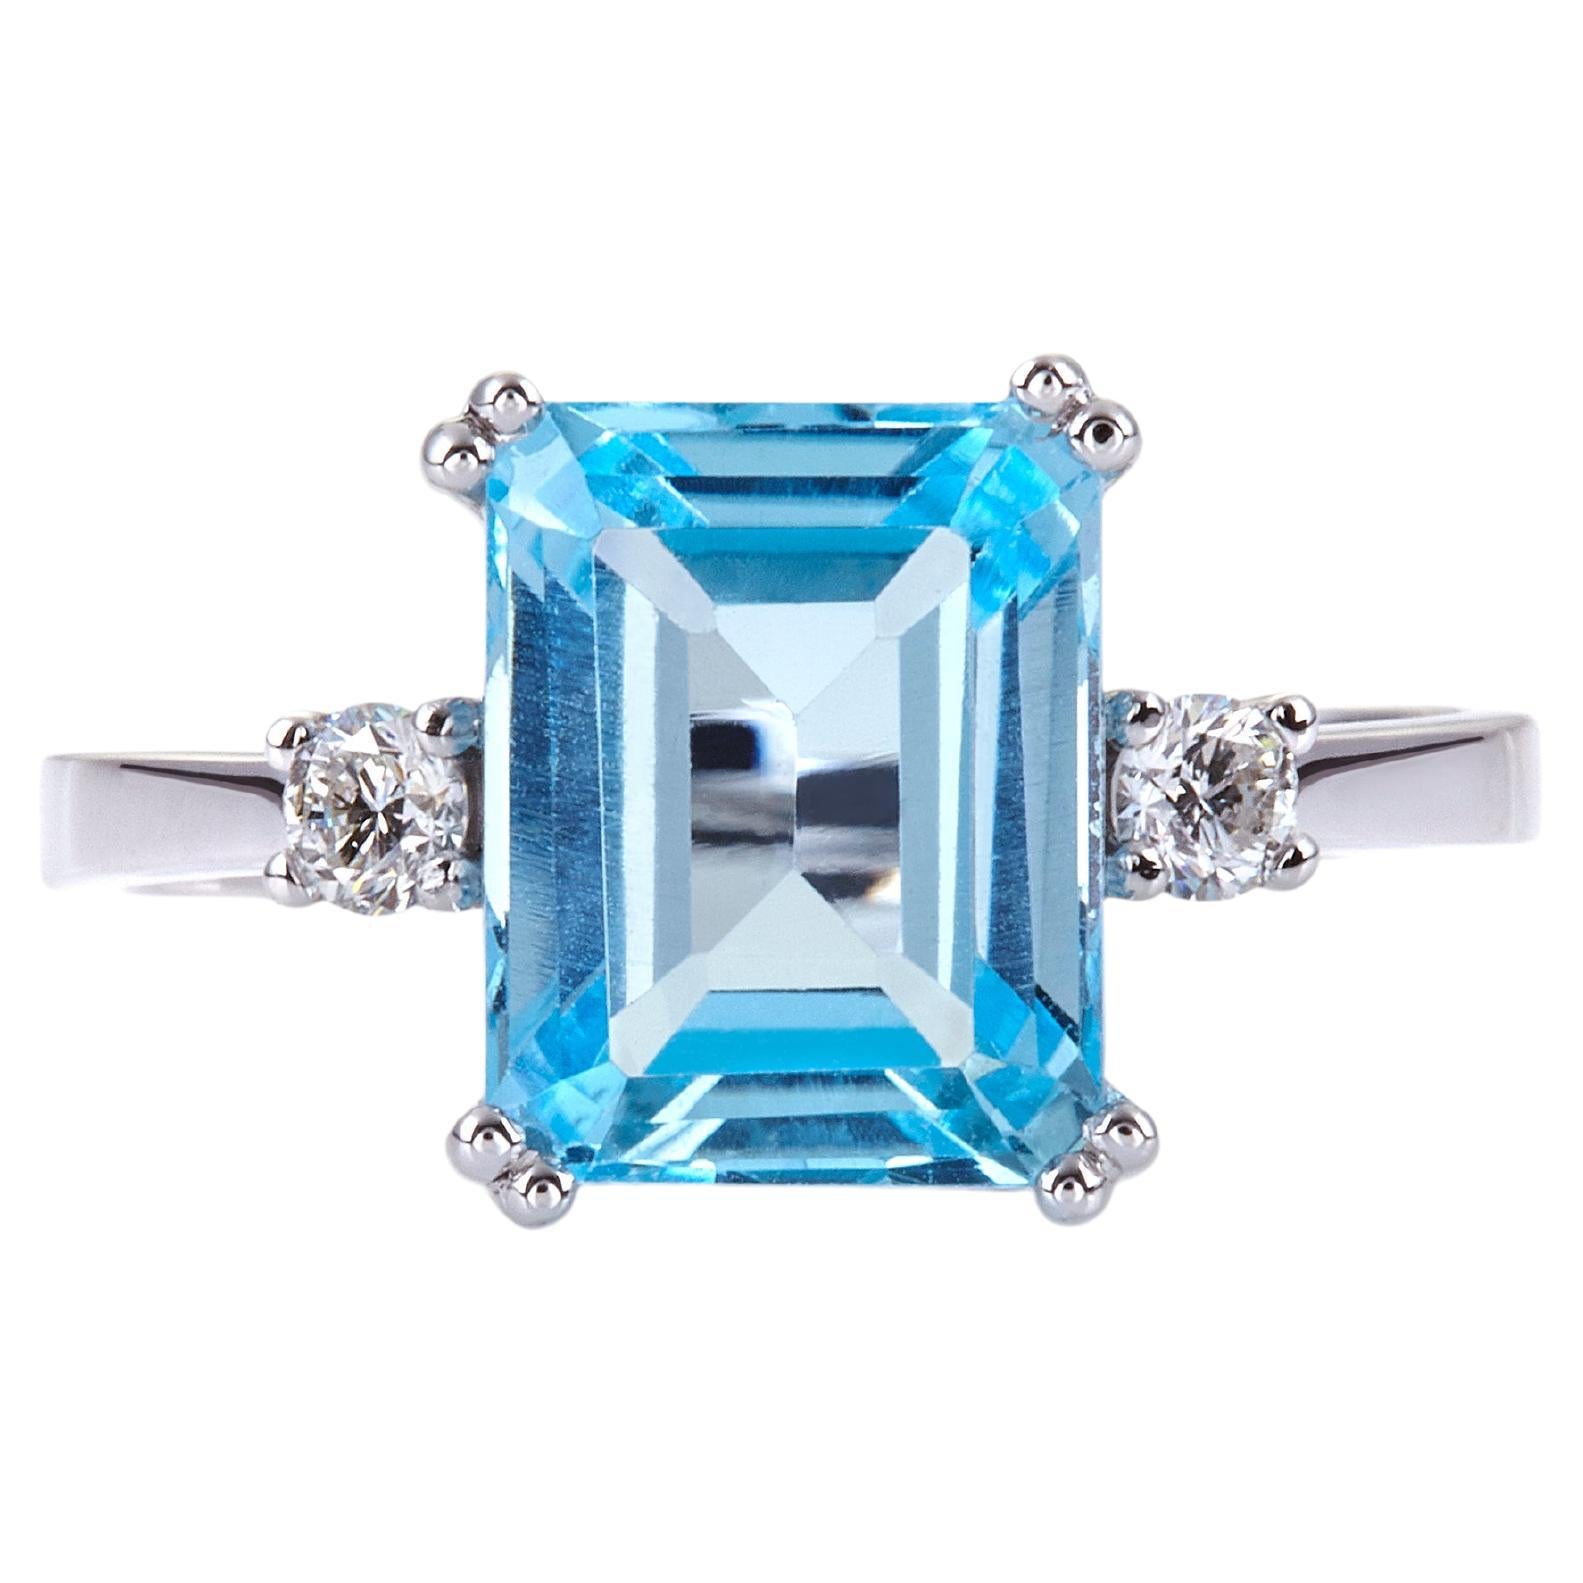 For Sale:  Double Prong Ring in 18Kt White Gold with Emerald Cut Blue Topaz and Diamonds